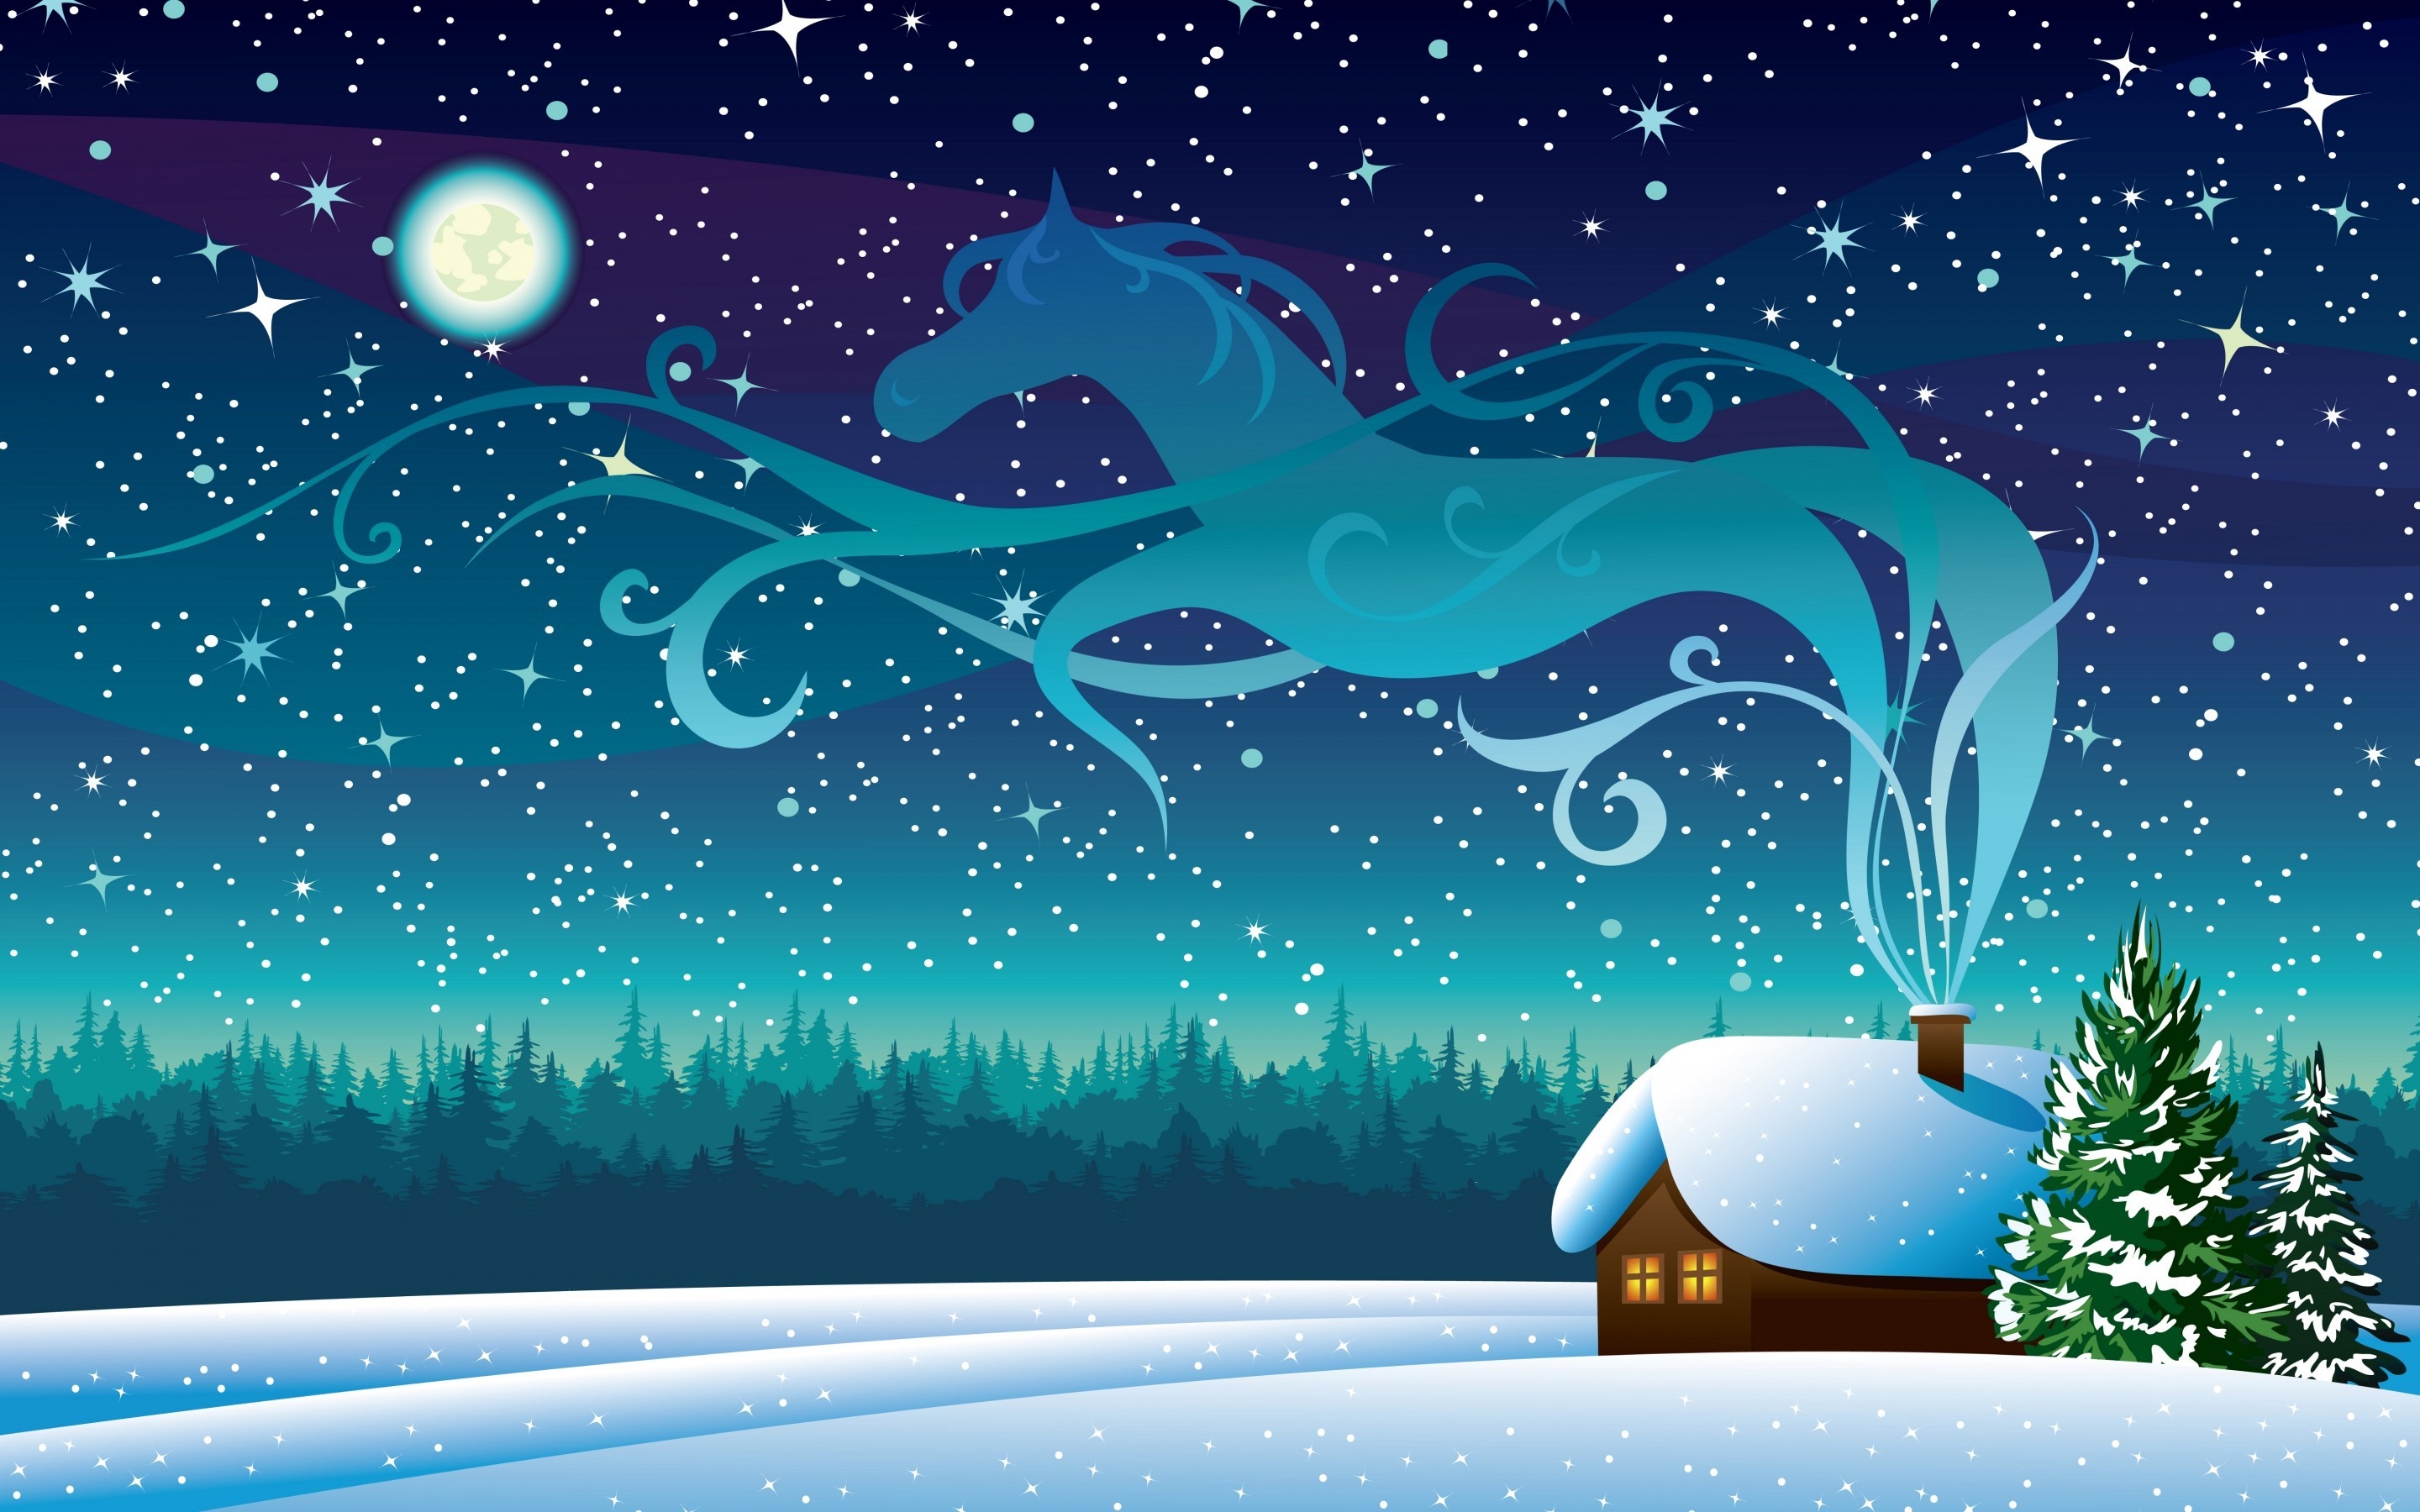 Winter Night Starry Sky Full Moon Wooden House Drawing For Christmas Uhd Wallpaper 2880x1800, Wallpaper13.com